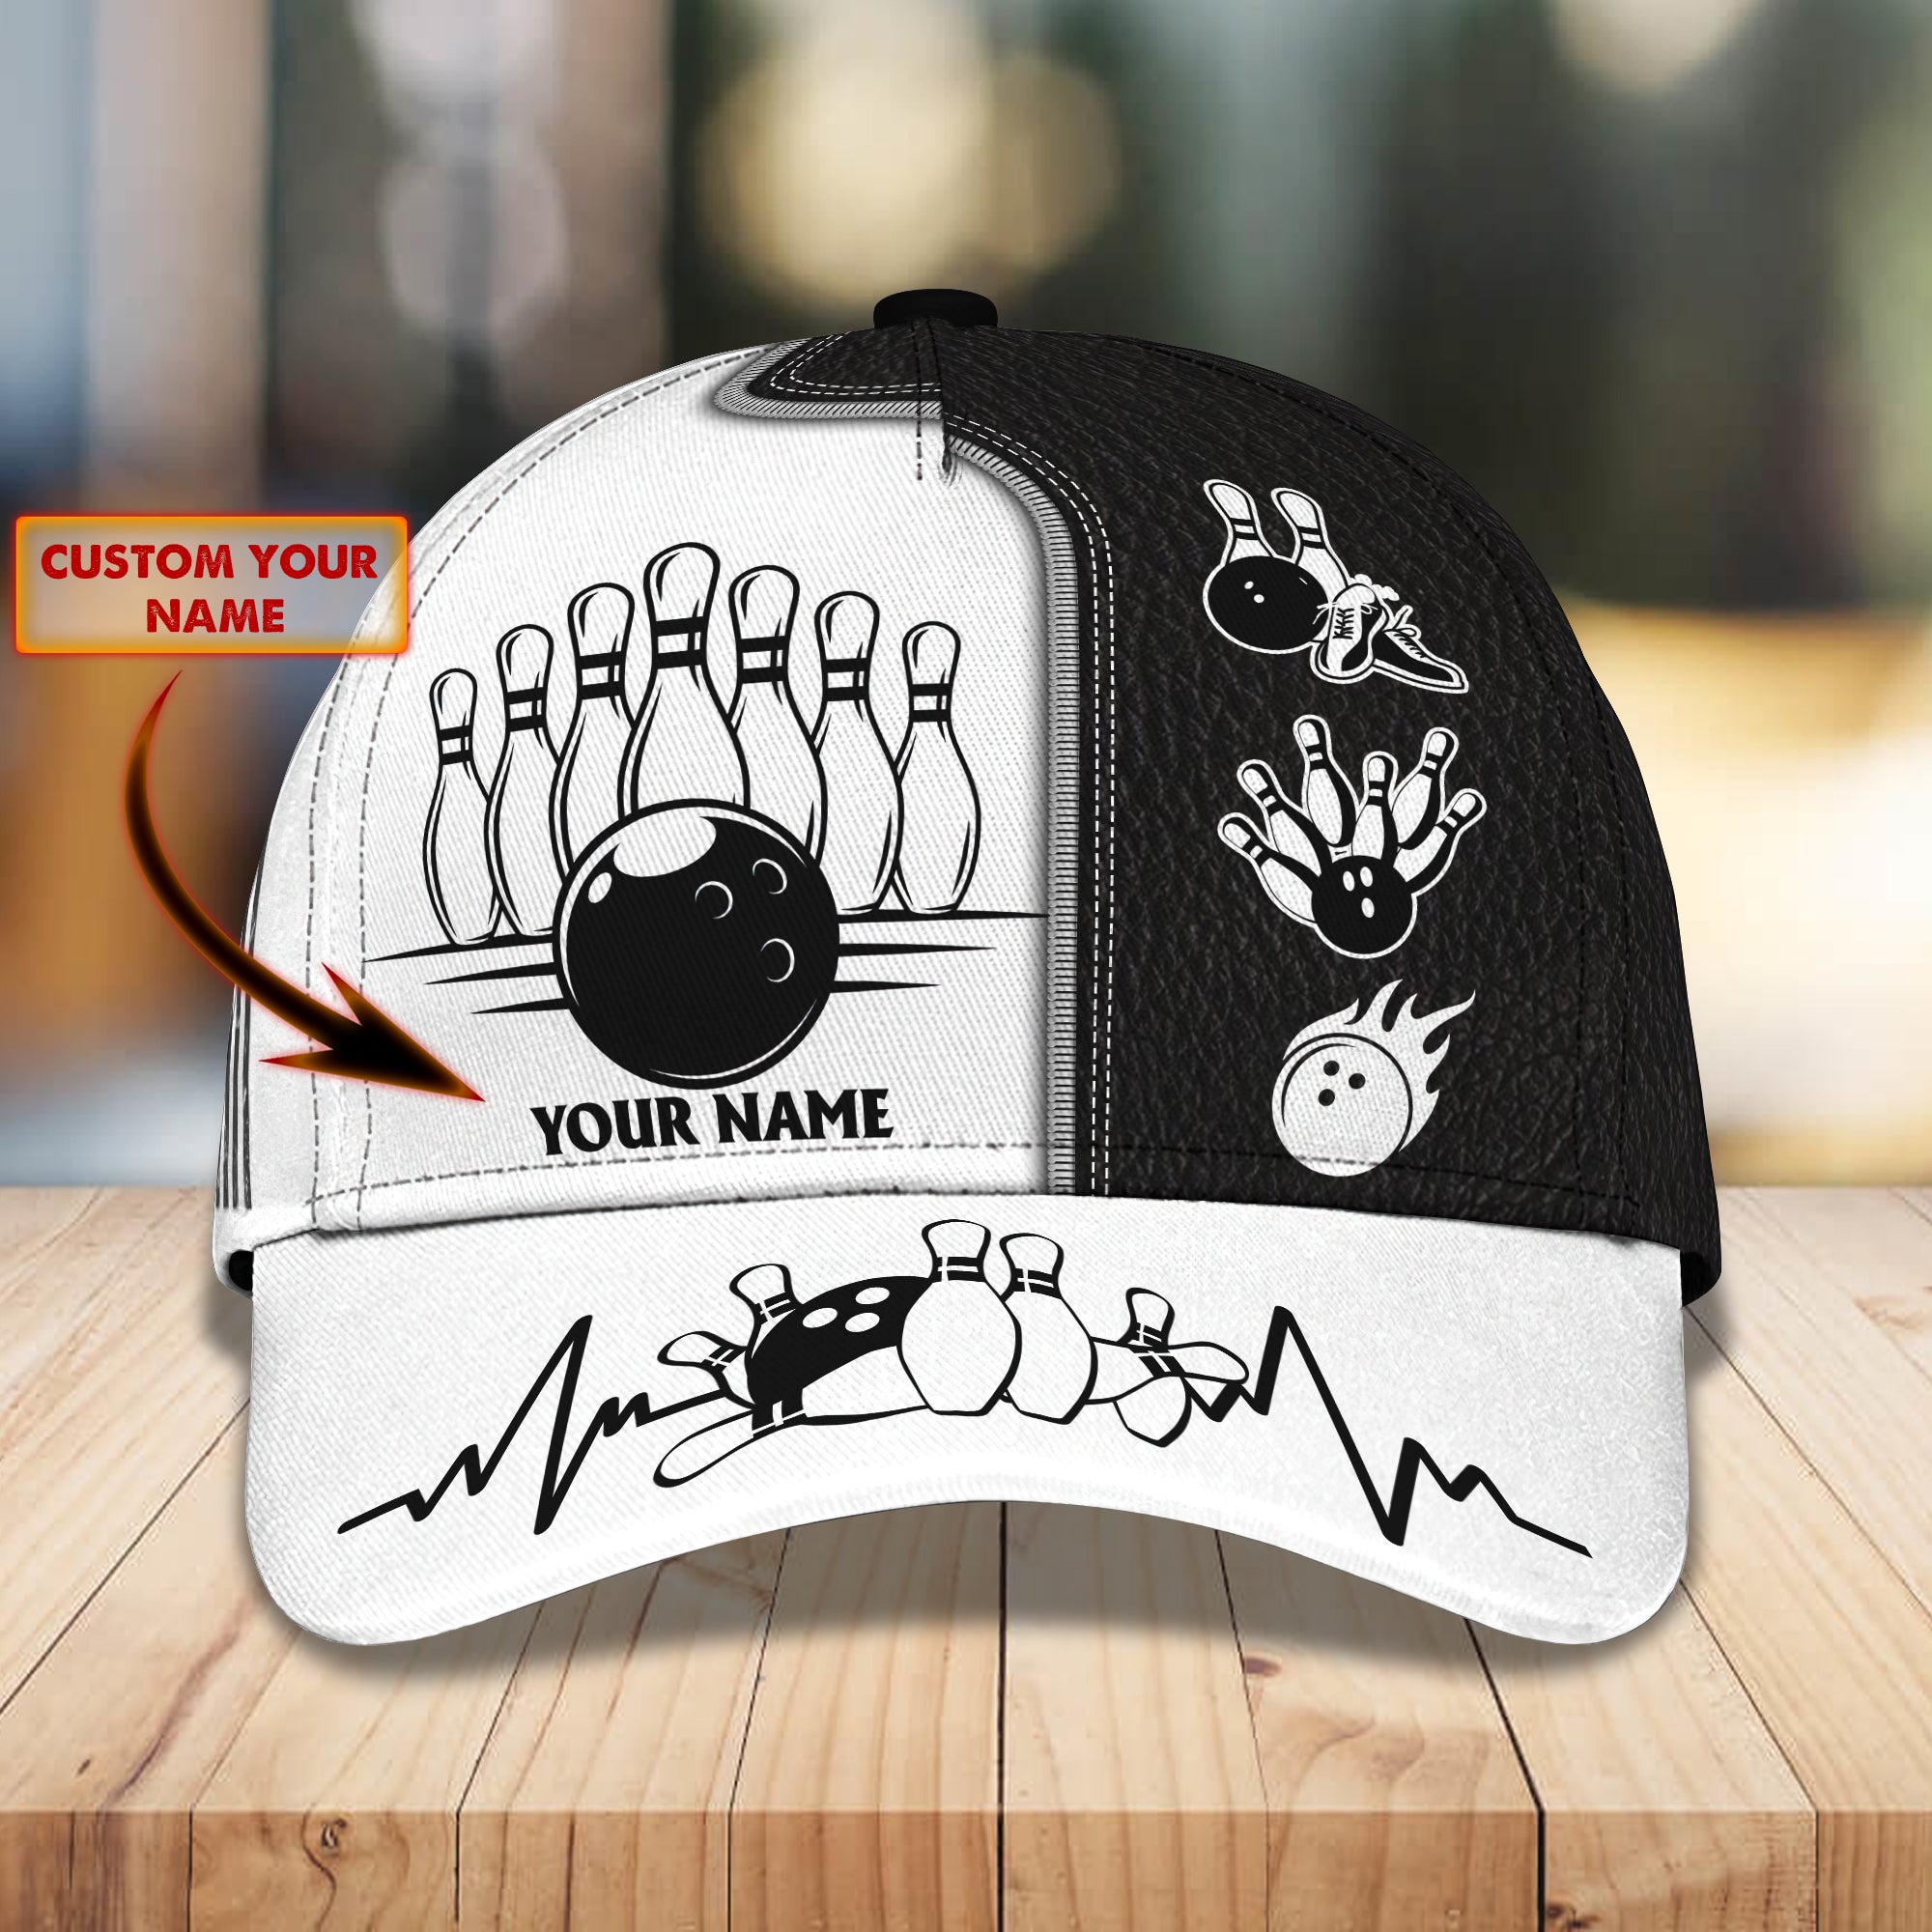 Love Bowing 01 - Personalized Name Cap - Pth98